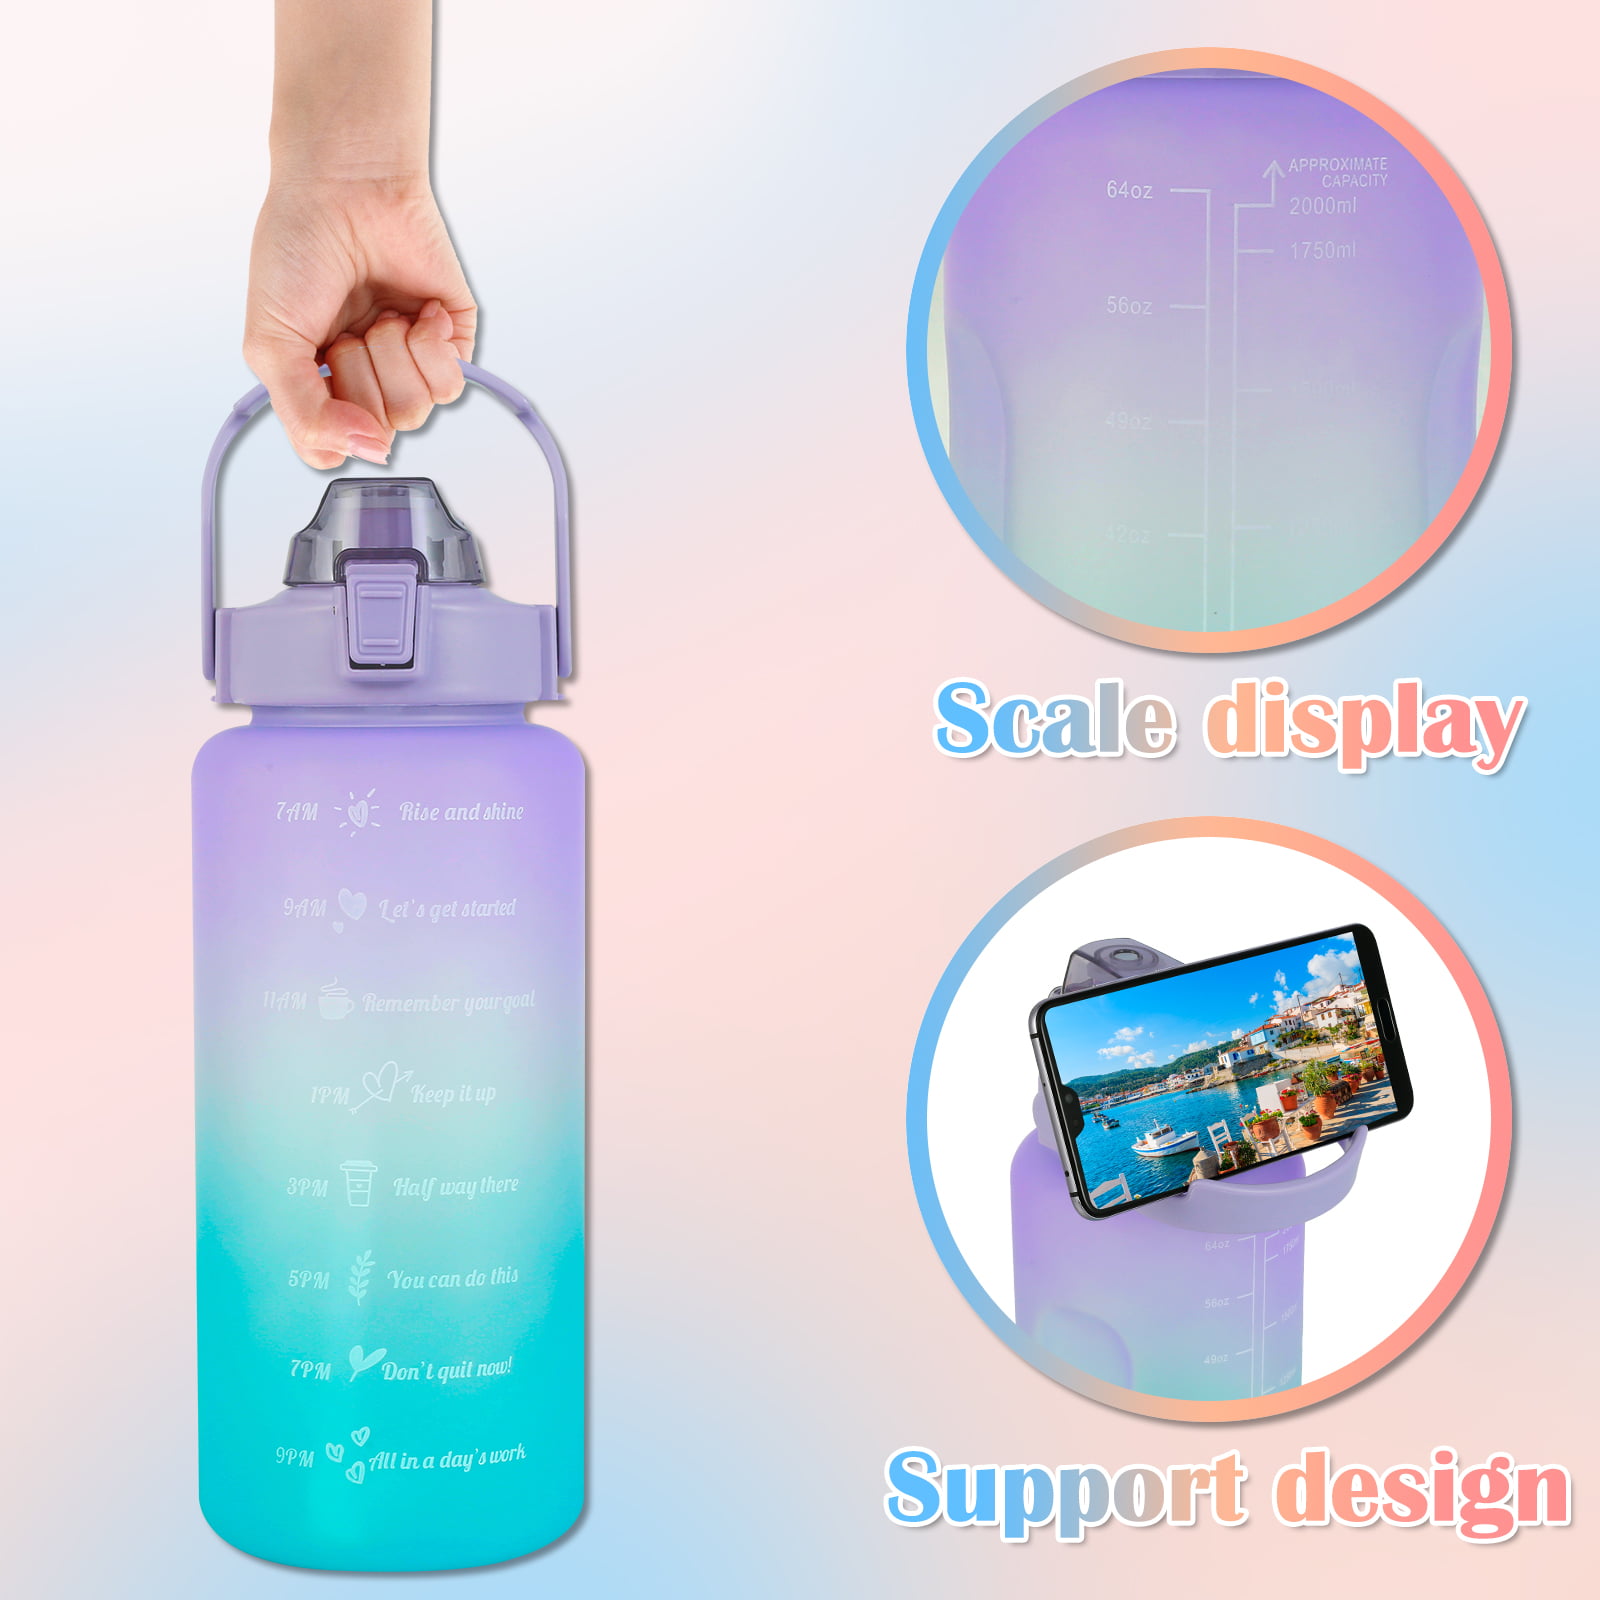 Maxer Game Anime 3D Lovely Eyes Teens Kids 28oz Metal Water Bottle for 6 Hours Hot & 24 Hours Cold Drinks, Sports Flask Great for Work, Gym, Travel